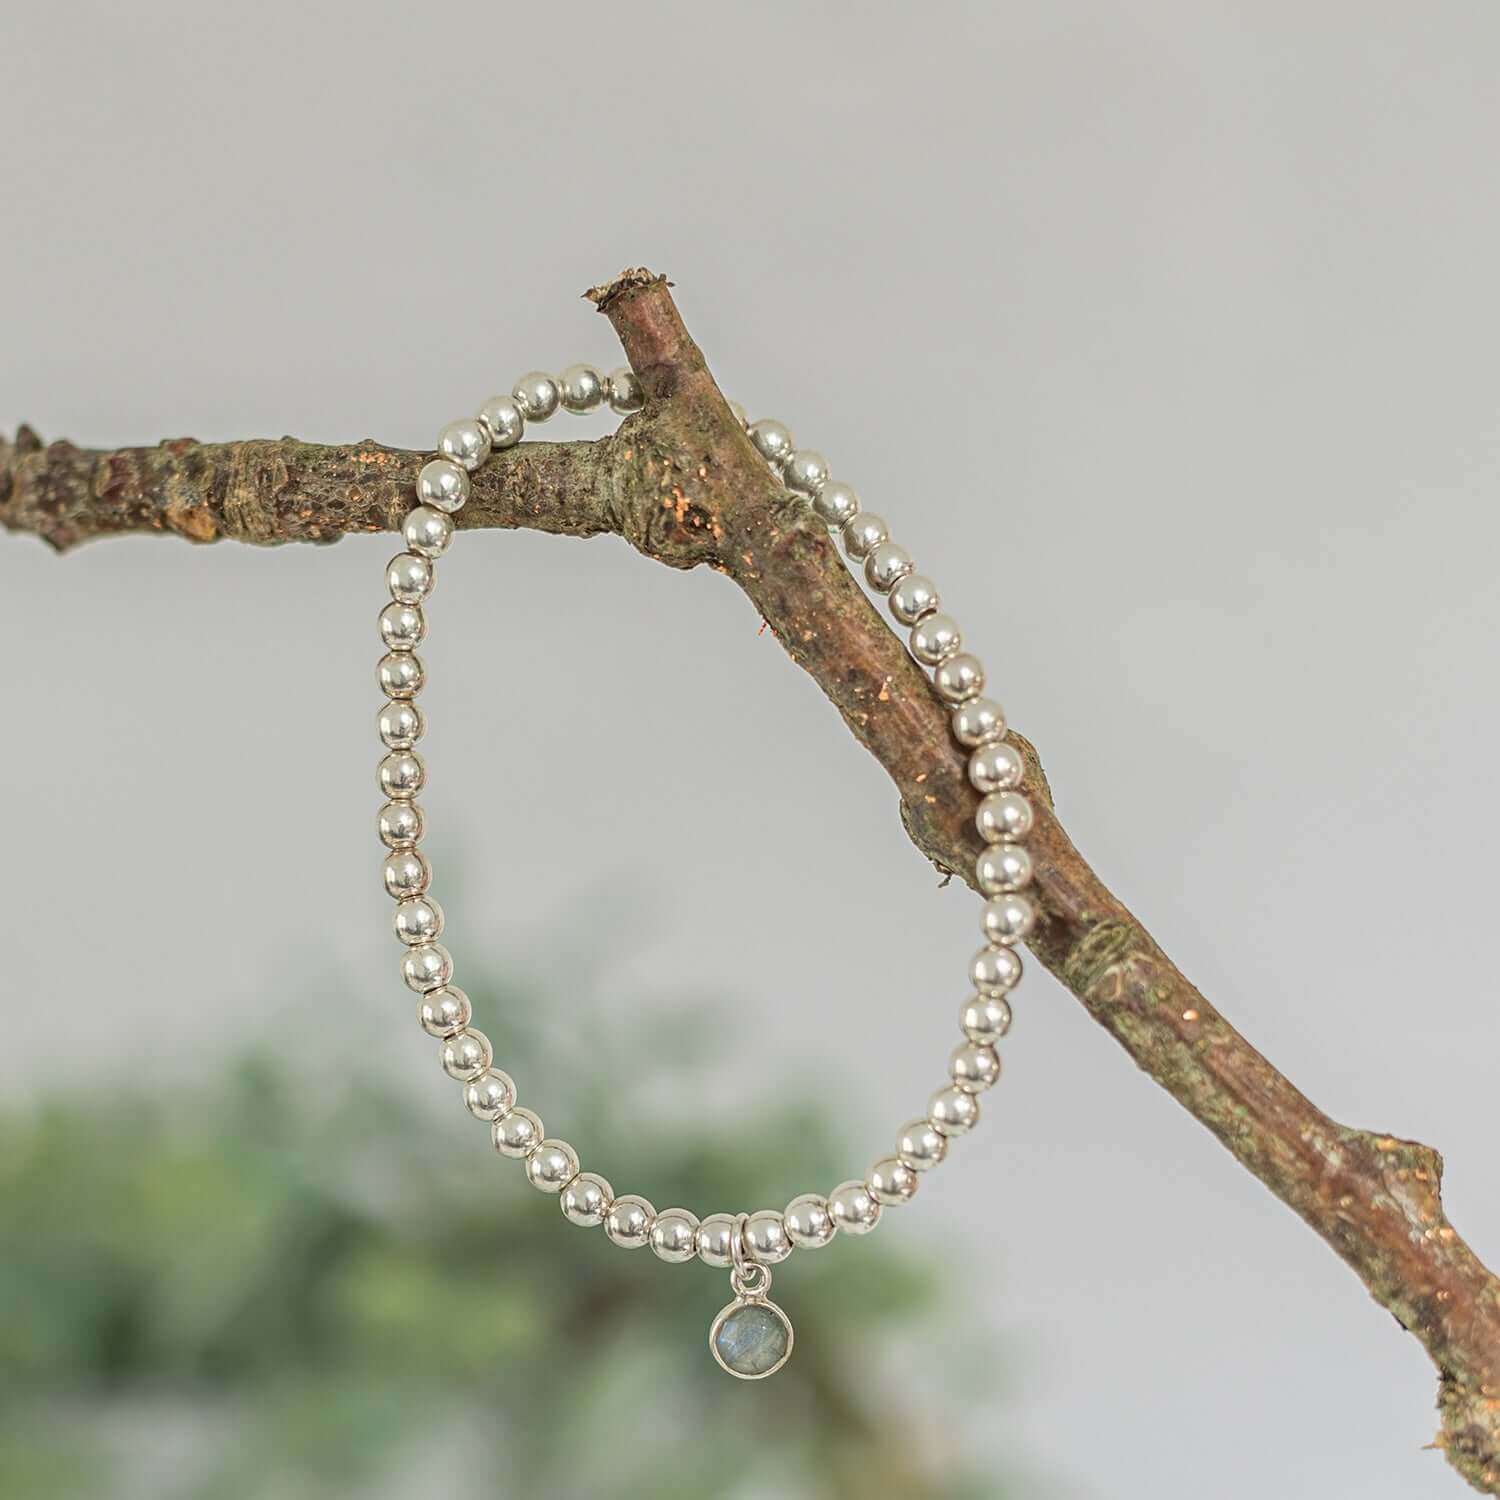 A delicate silver labradorite beaded bracelet with a small, round pendant is draped over a rustic tree branch. The background is blurred, emphasizing the elegant simplicity and natural setting of this Labradorite Birthstone Jewellery Set by Made Here with Love.